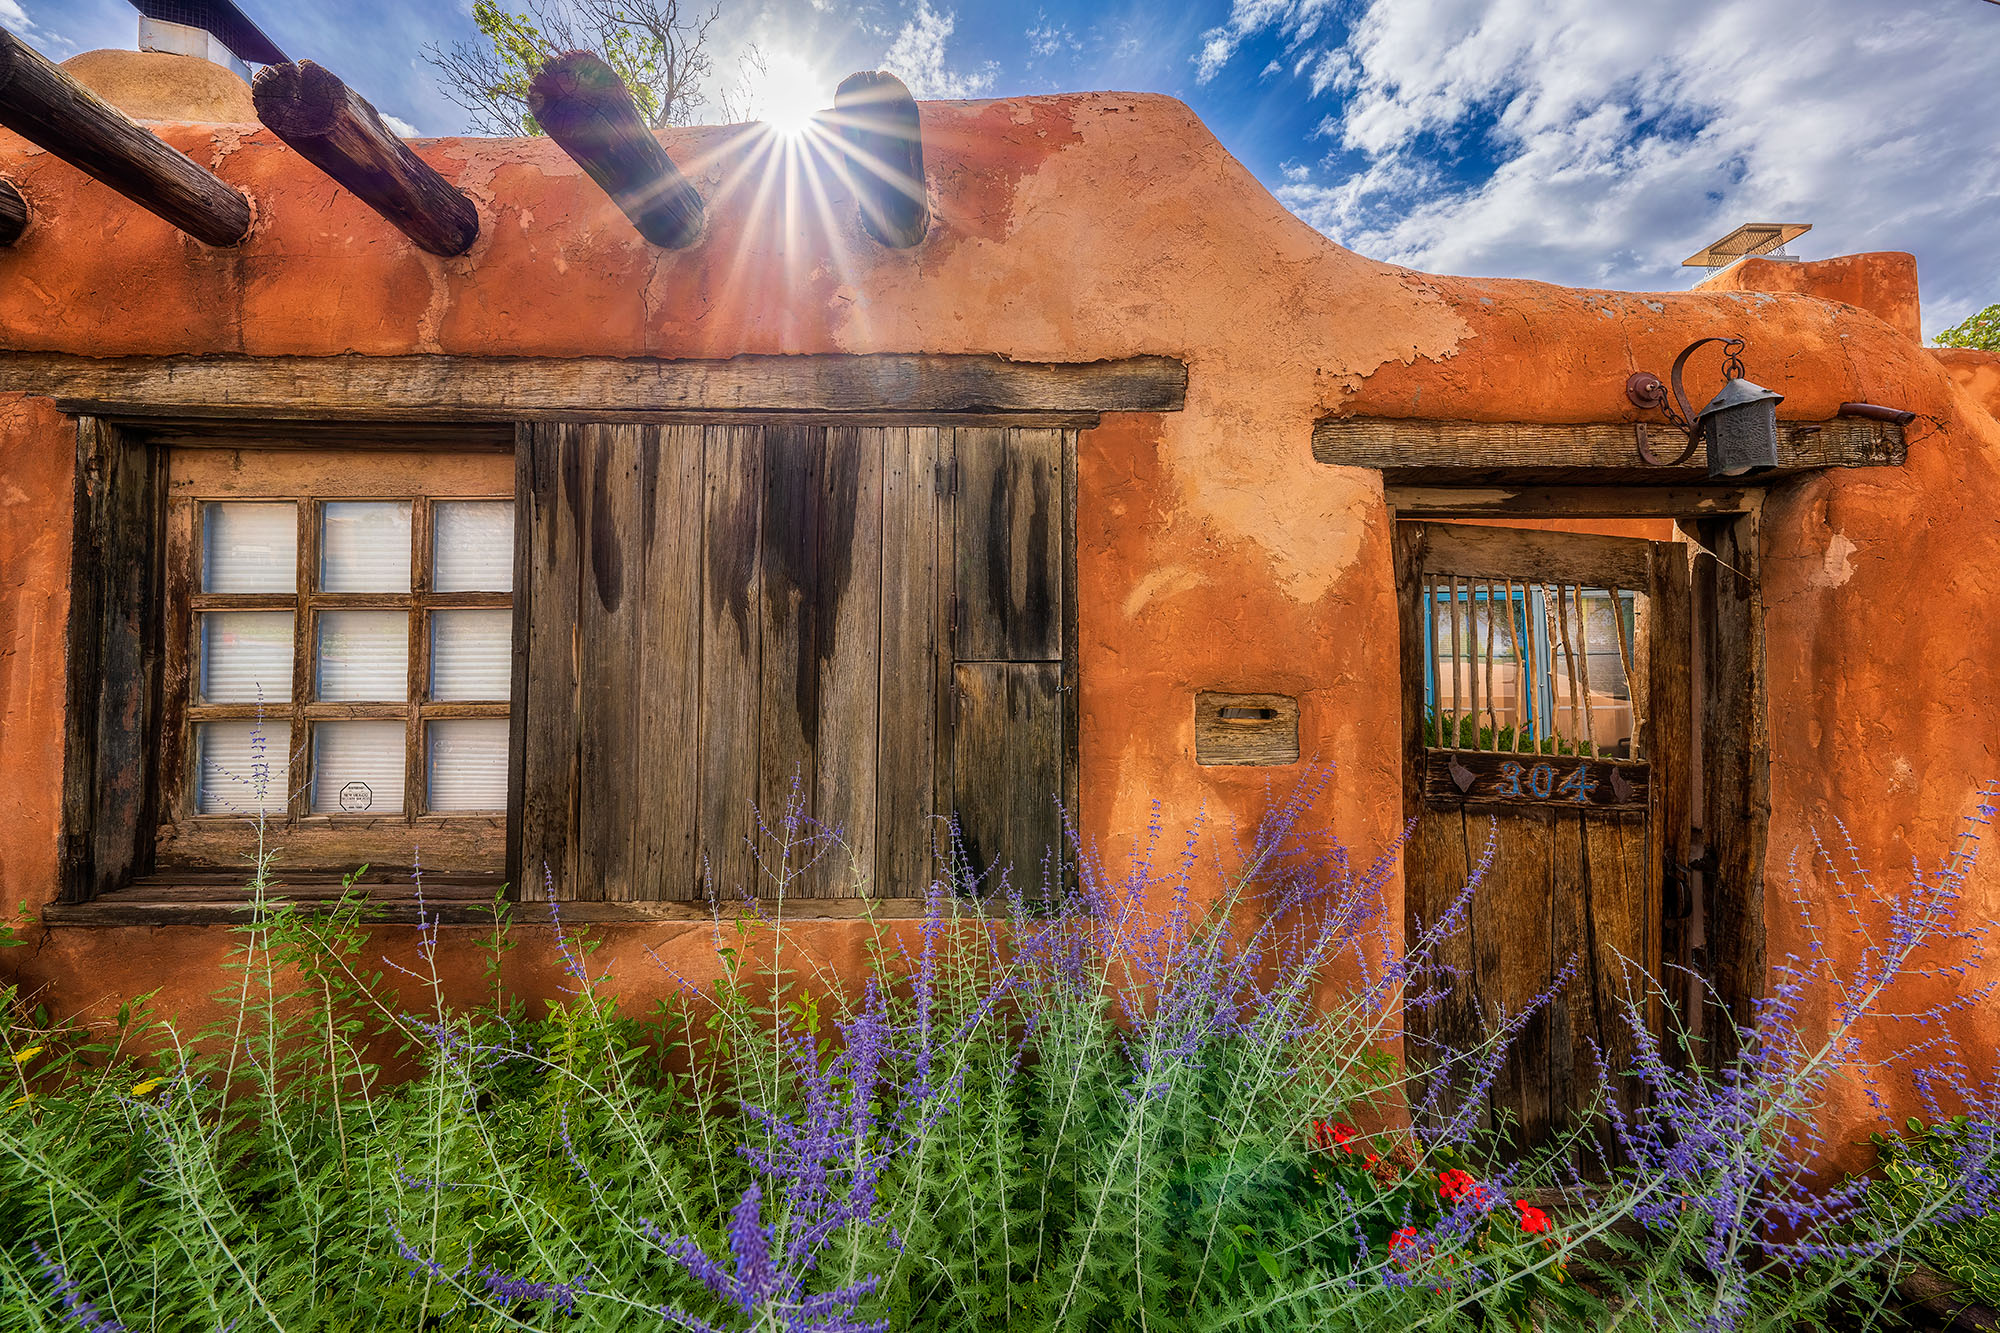 "Adobe Radiance" captures the essence of Santa Fe's historic art district. This image showcases an aged adobe home with rustic...